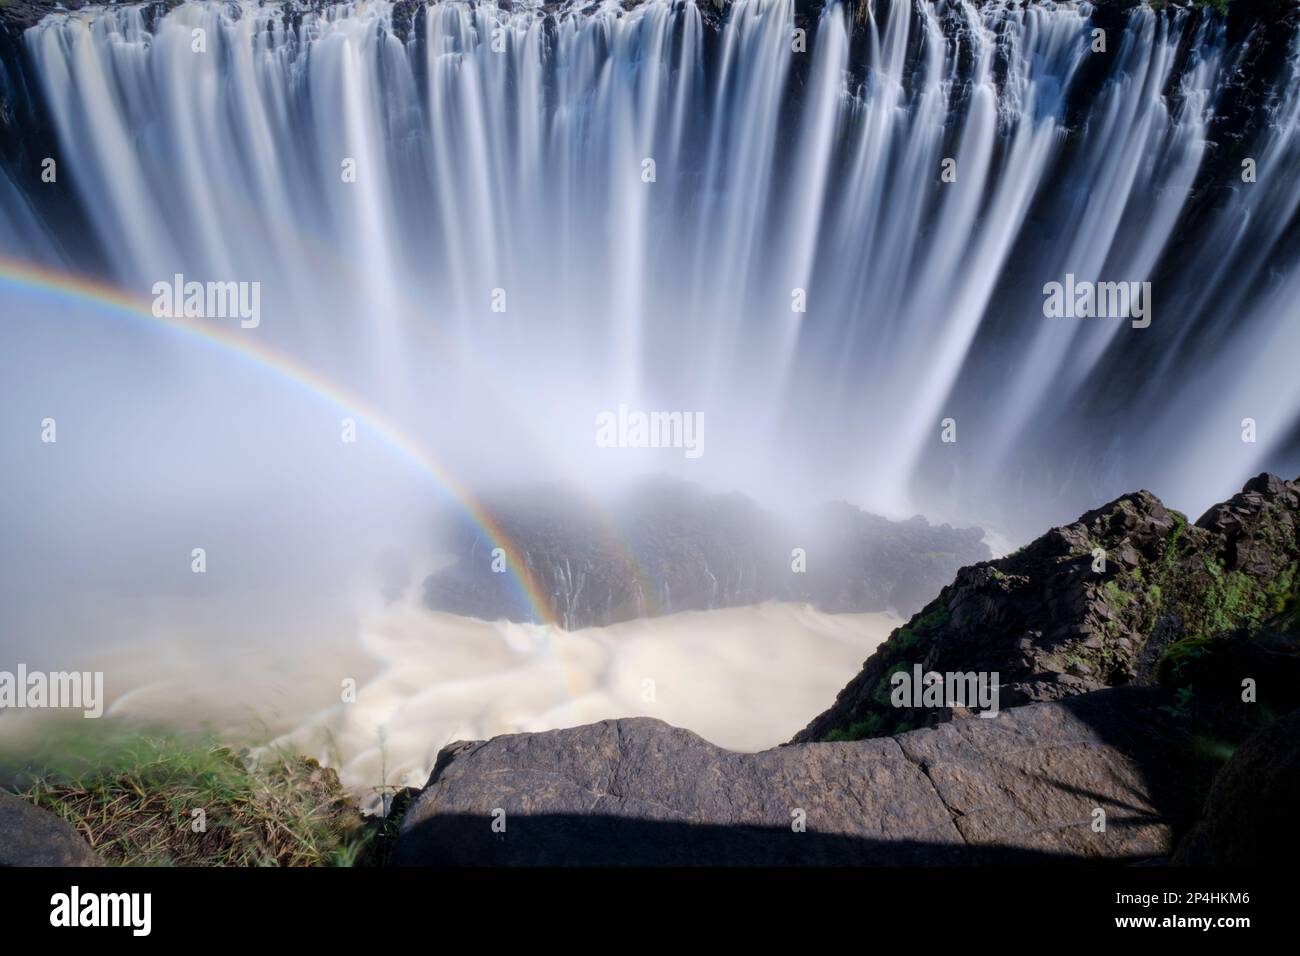 Waterfalls with rainbow, water falling down deep into the gorge. Victoria Waterfalls, Zambia, Africa Stock Photo